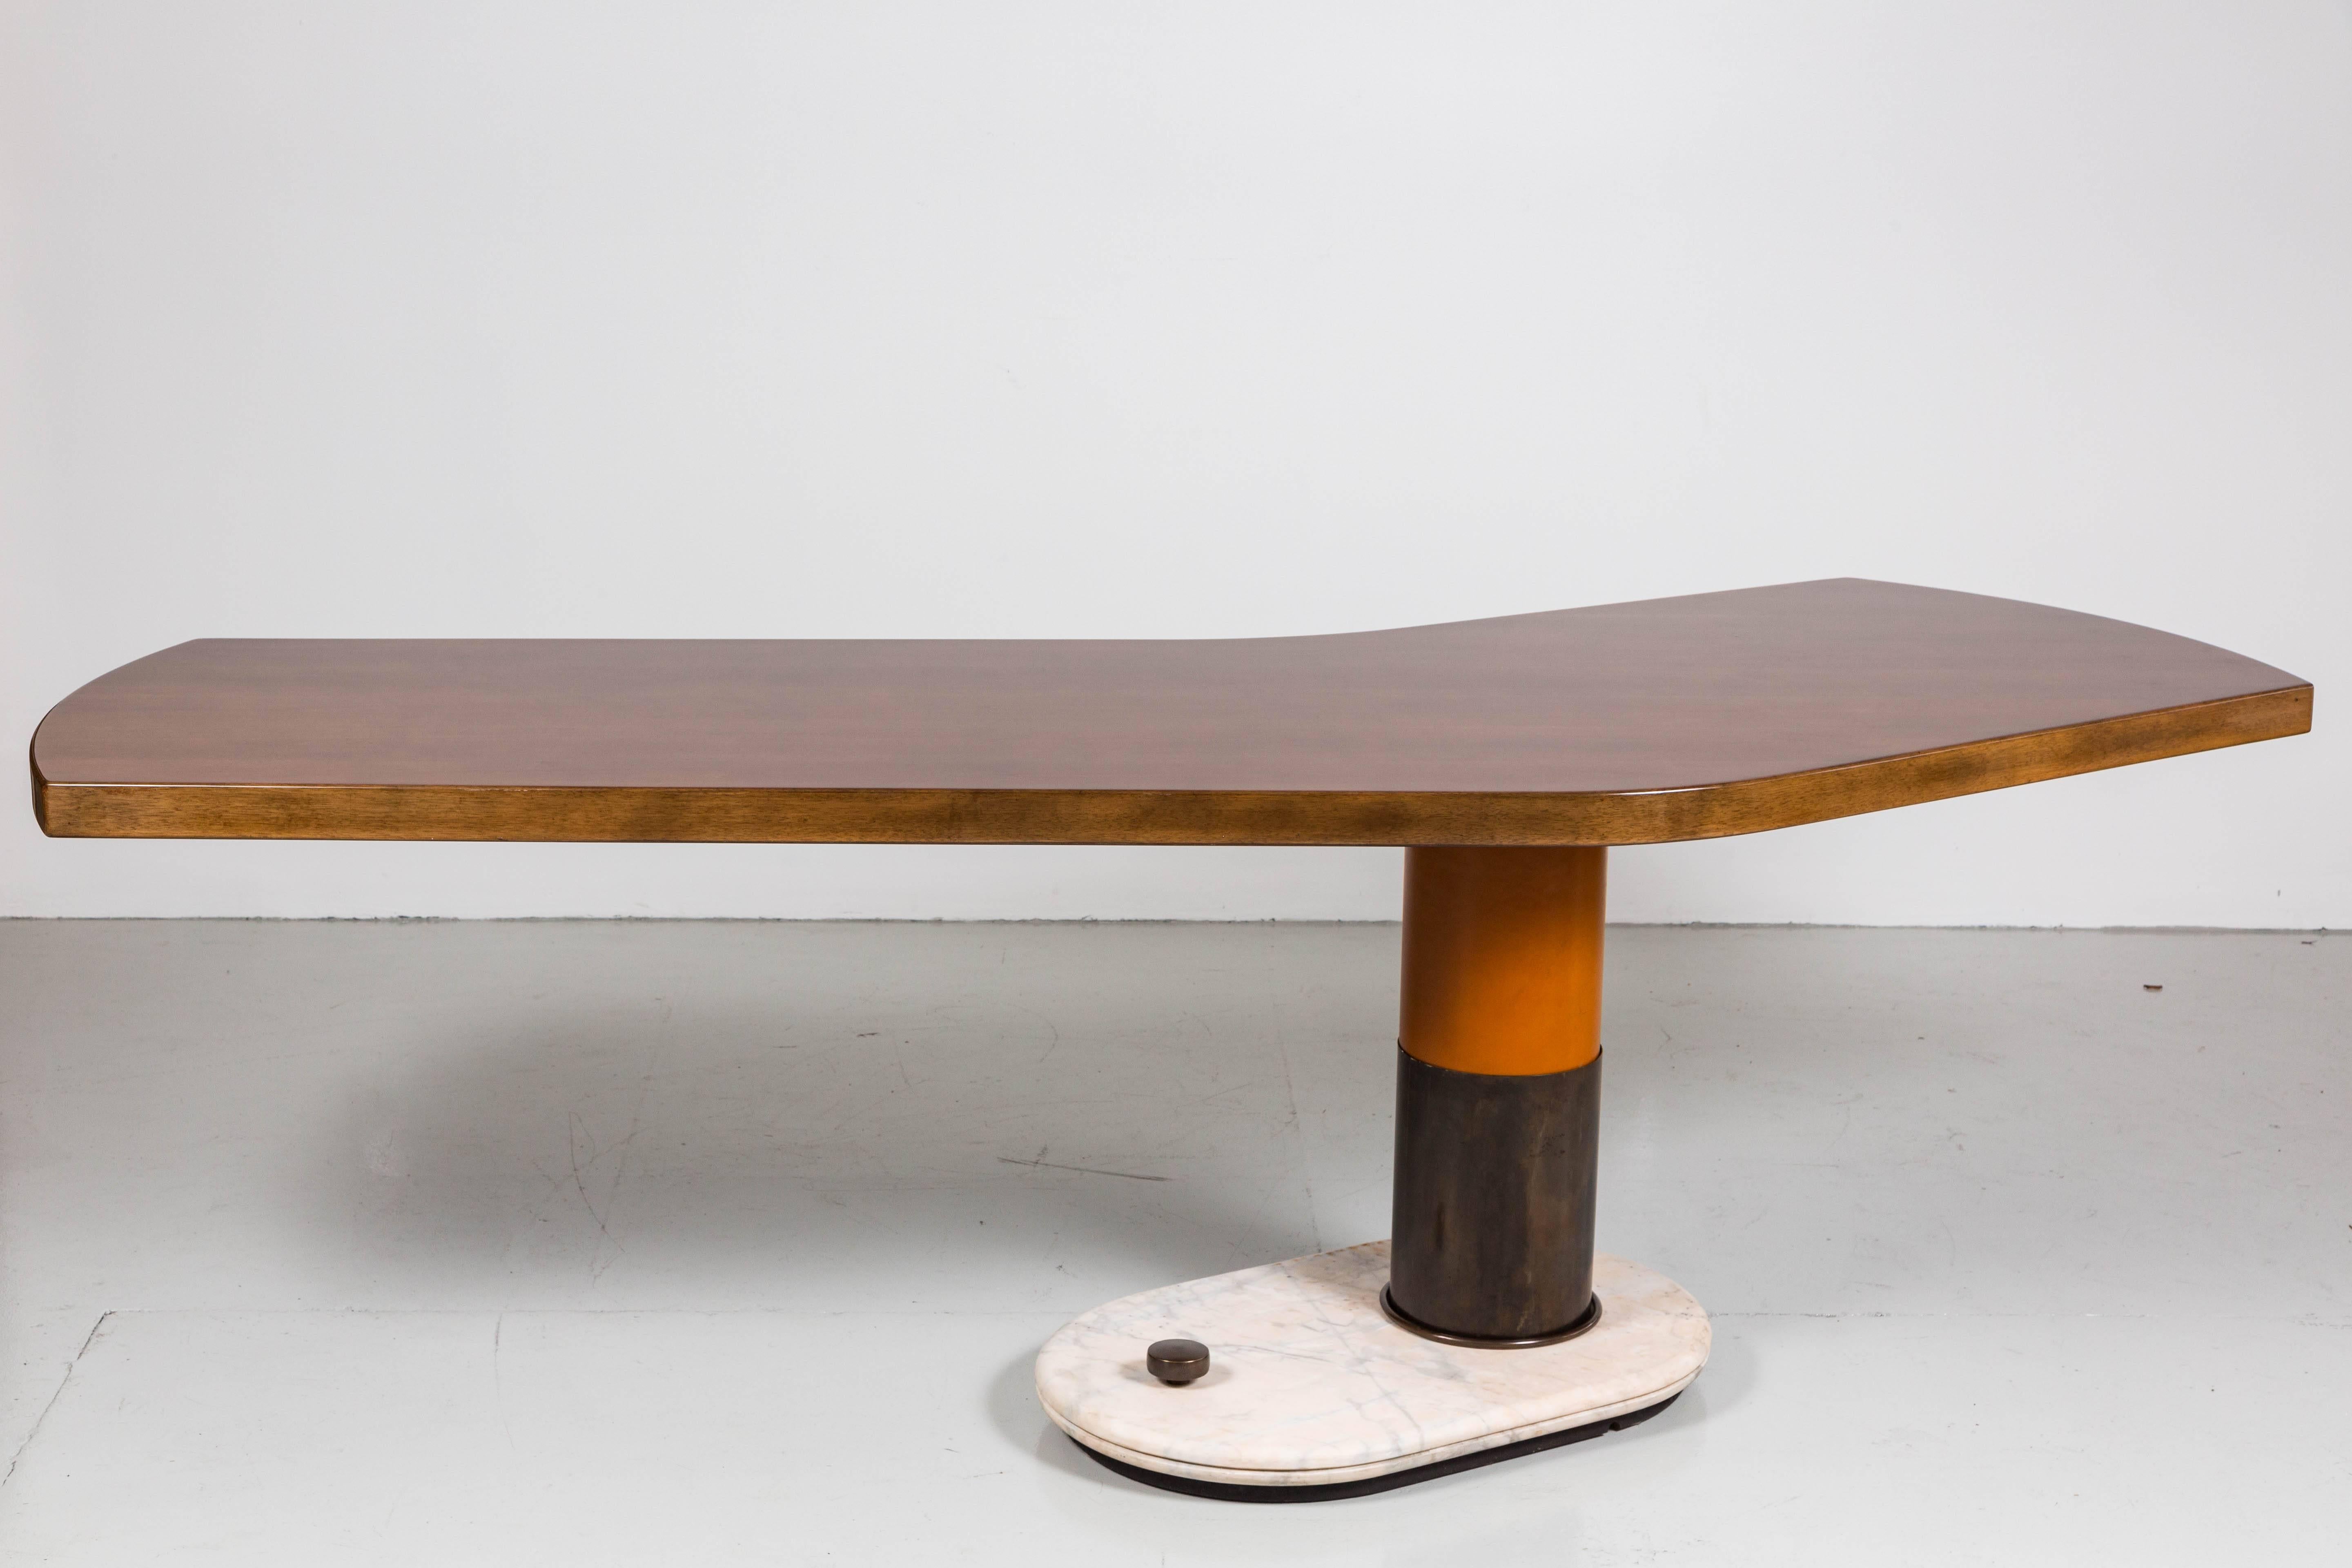 An incredible Italian desk attributed to Gio Ponti with an asymmetrical walnut top over an off center cylindrical bronze pedestal wrapped in caramel colored leather. Solid marble base has bronze trim. 
Massive in scale and truly unique piece.